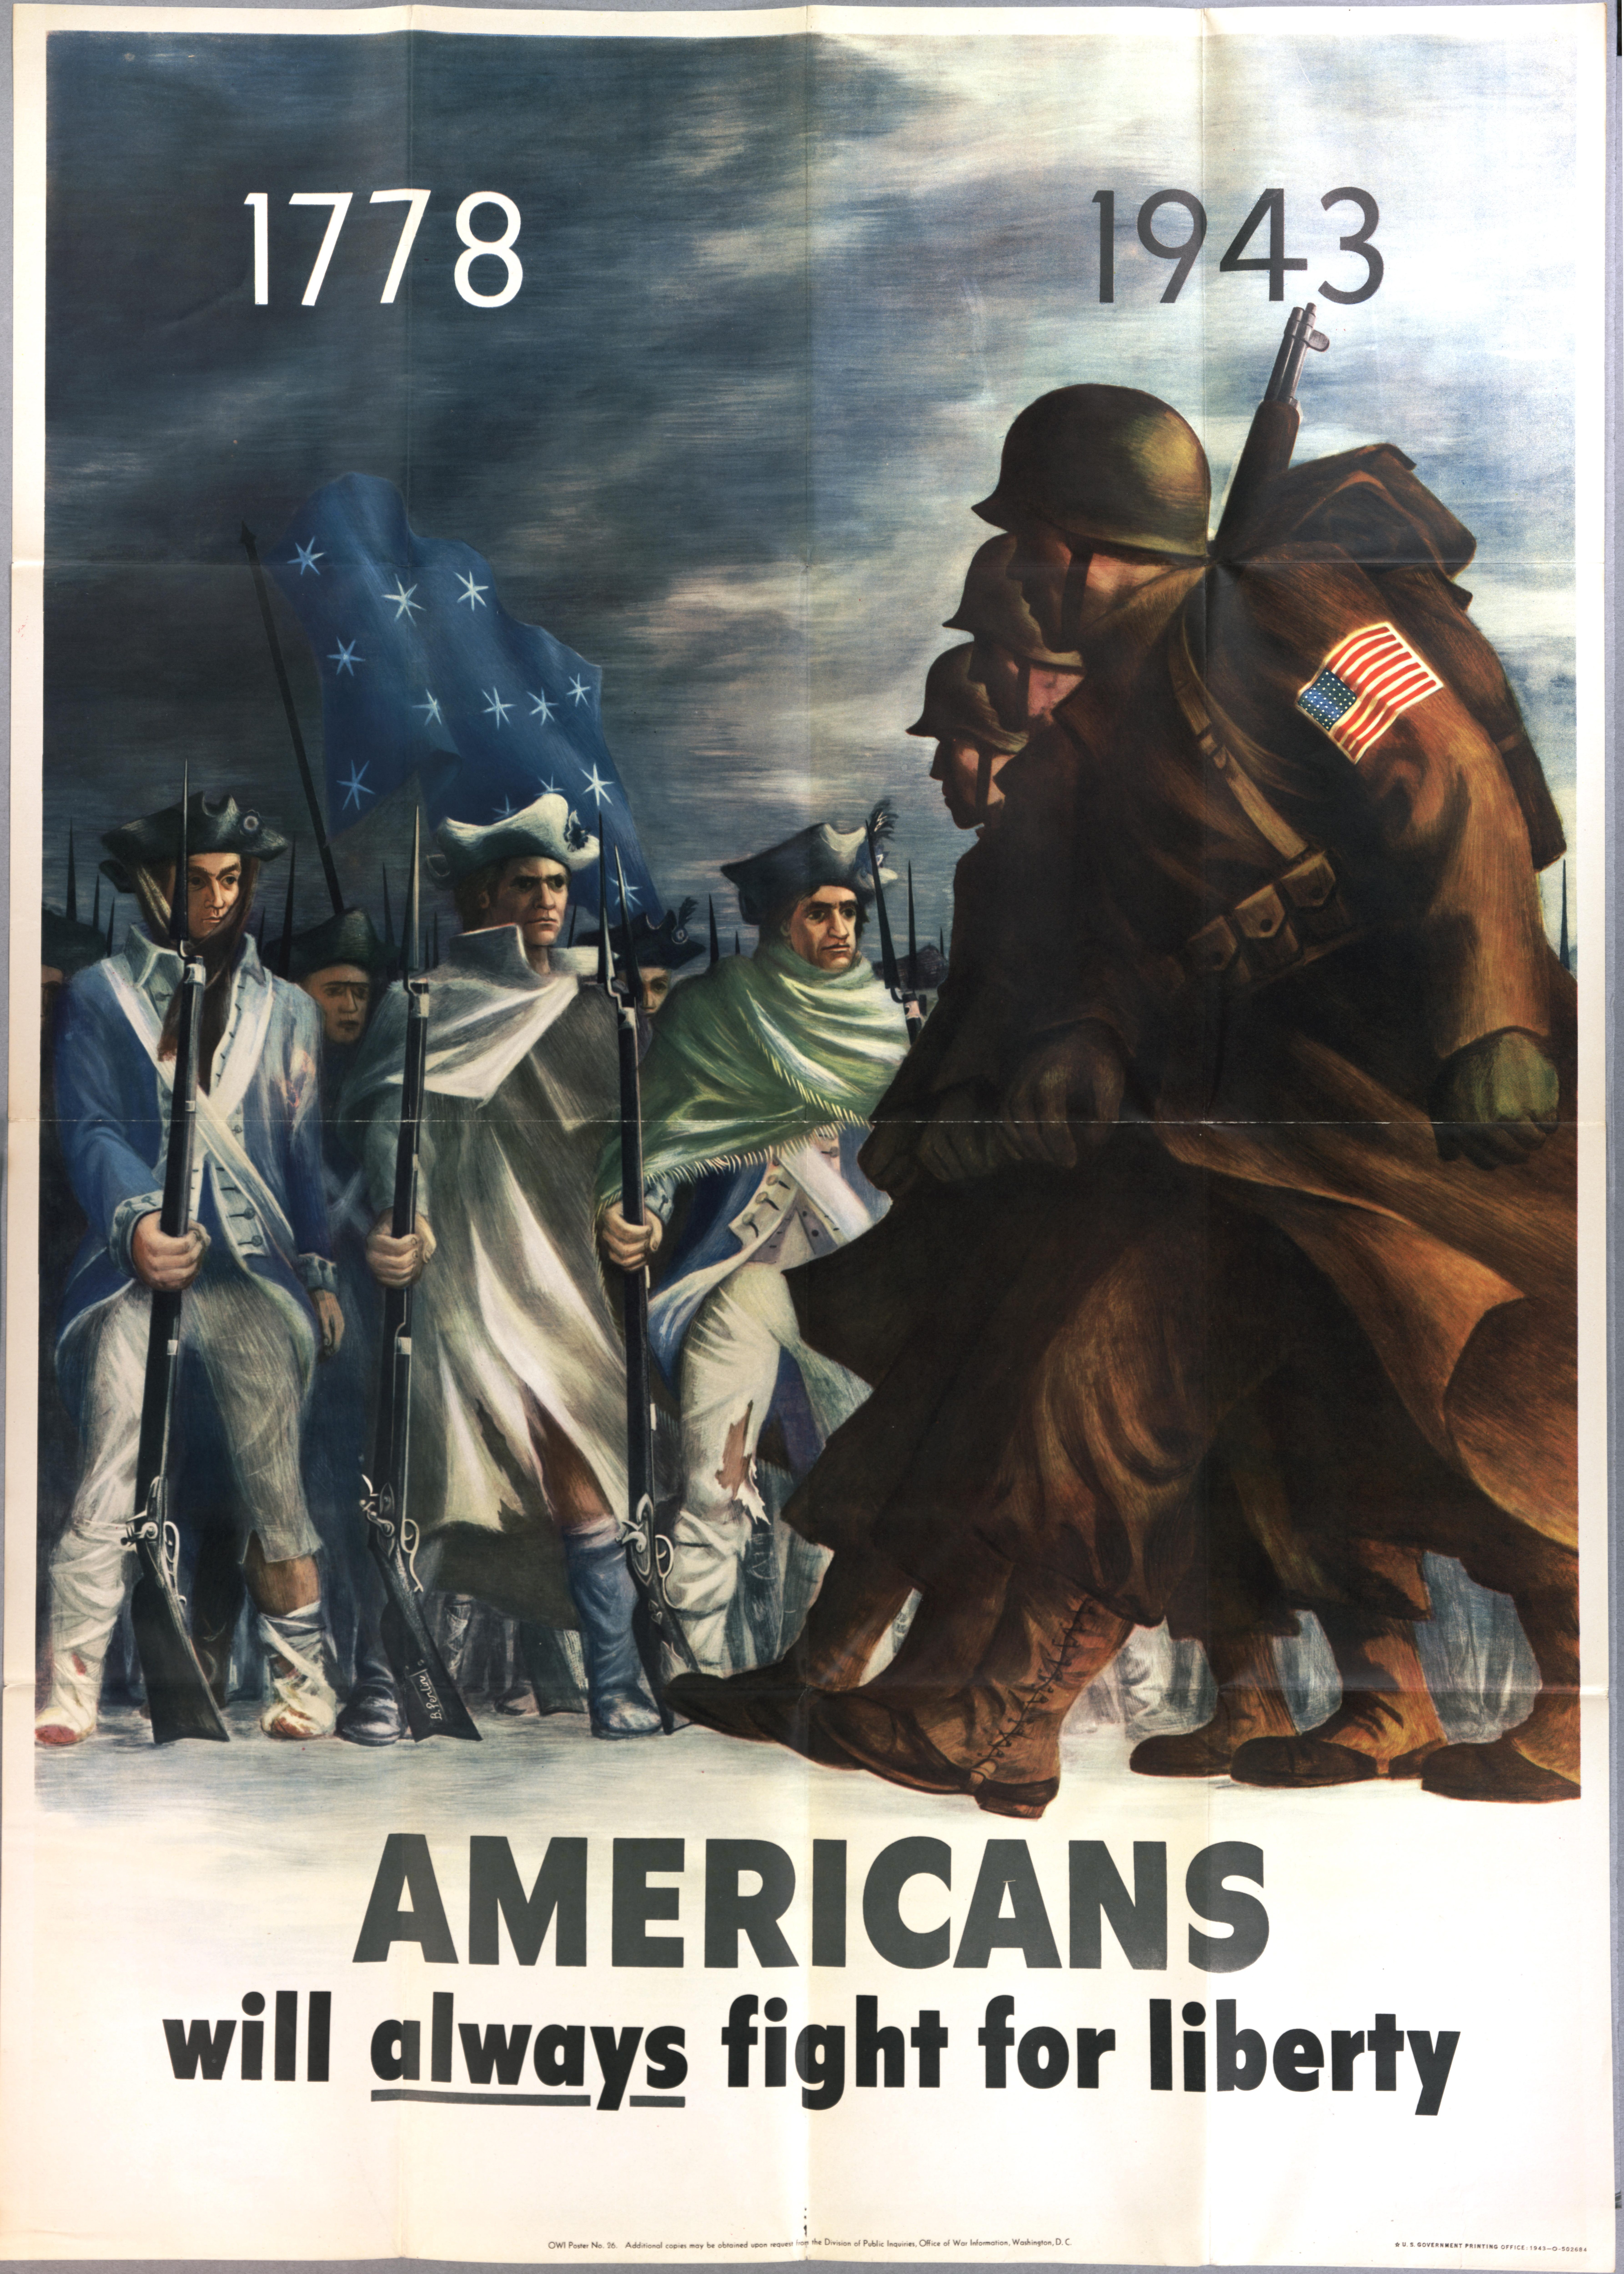 Poster depicting colonial-era and World War II-era American soldiers, created in 1943. This image, produced by the United States Office of War Information, was meant to remind Americans of their historical promise to fight for liberty. (The Gilder Lehrman Institute, GLC09520.37)